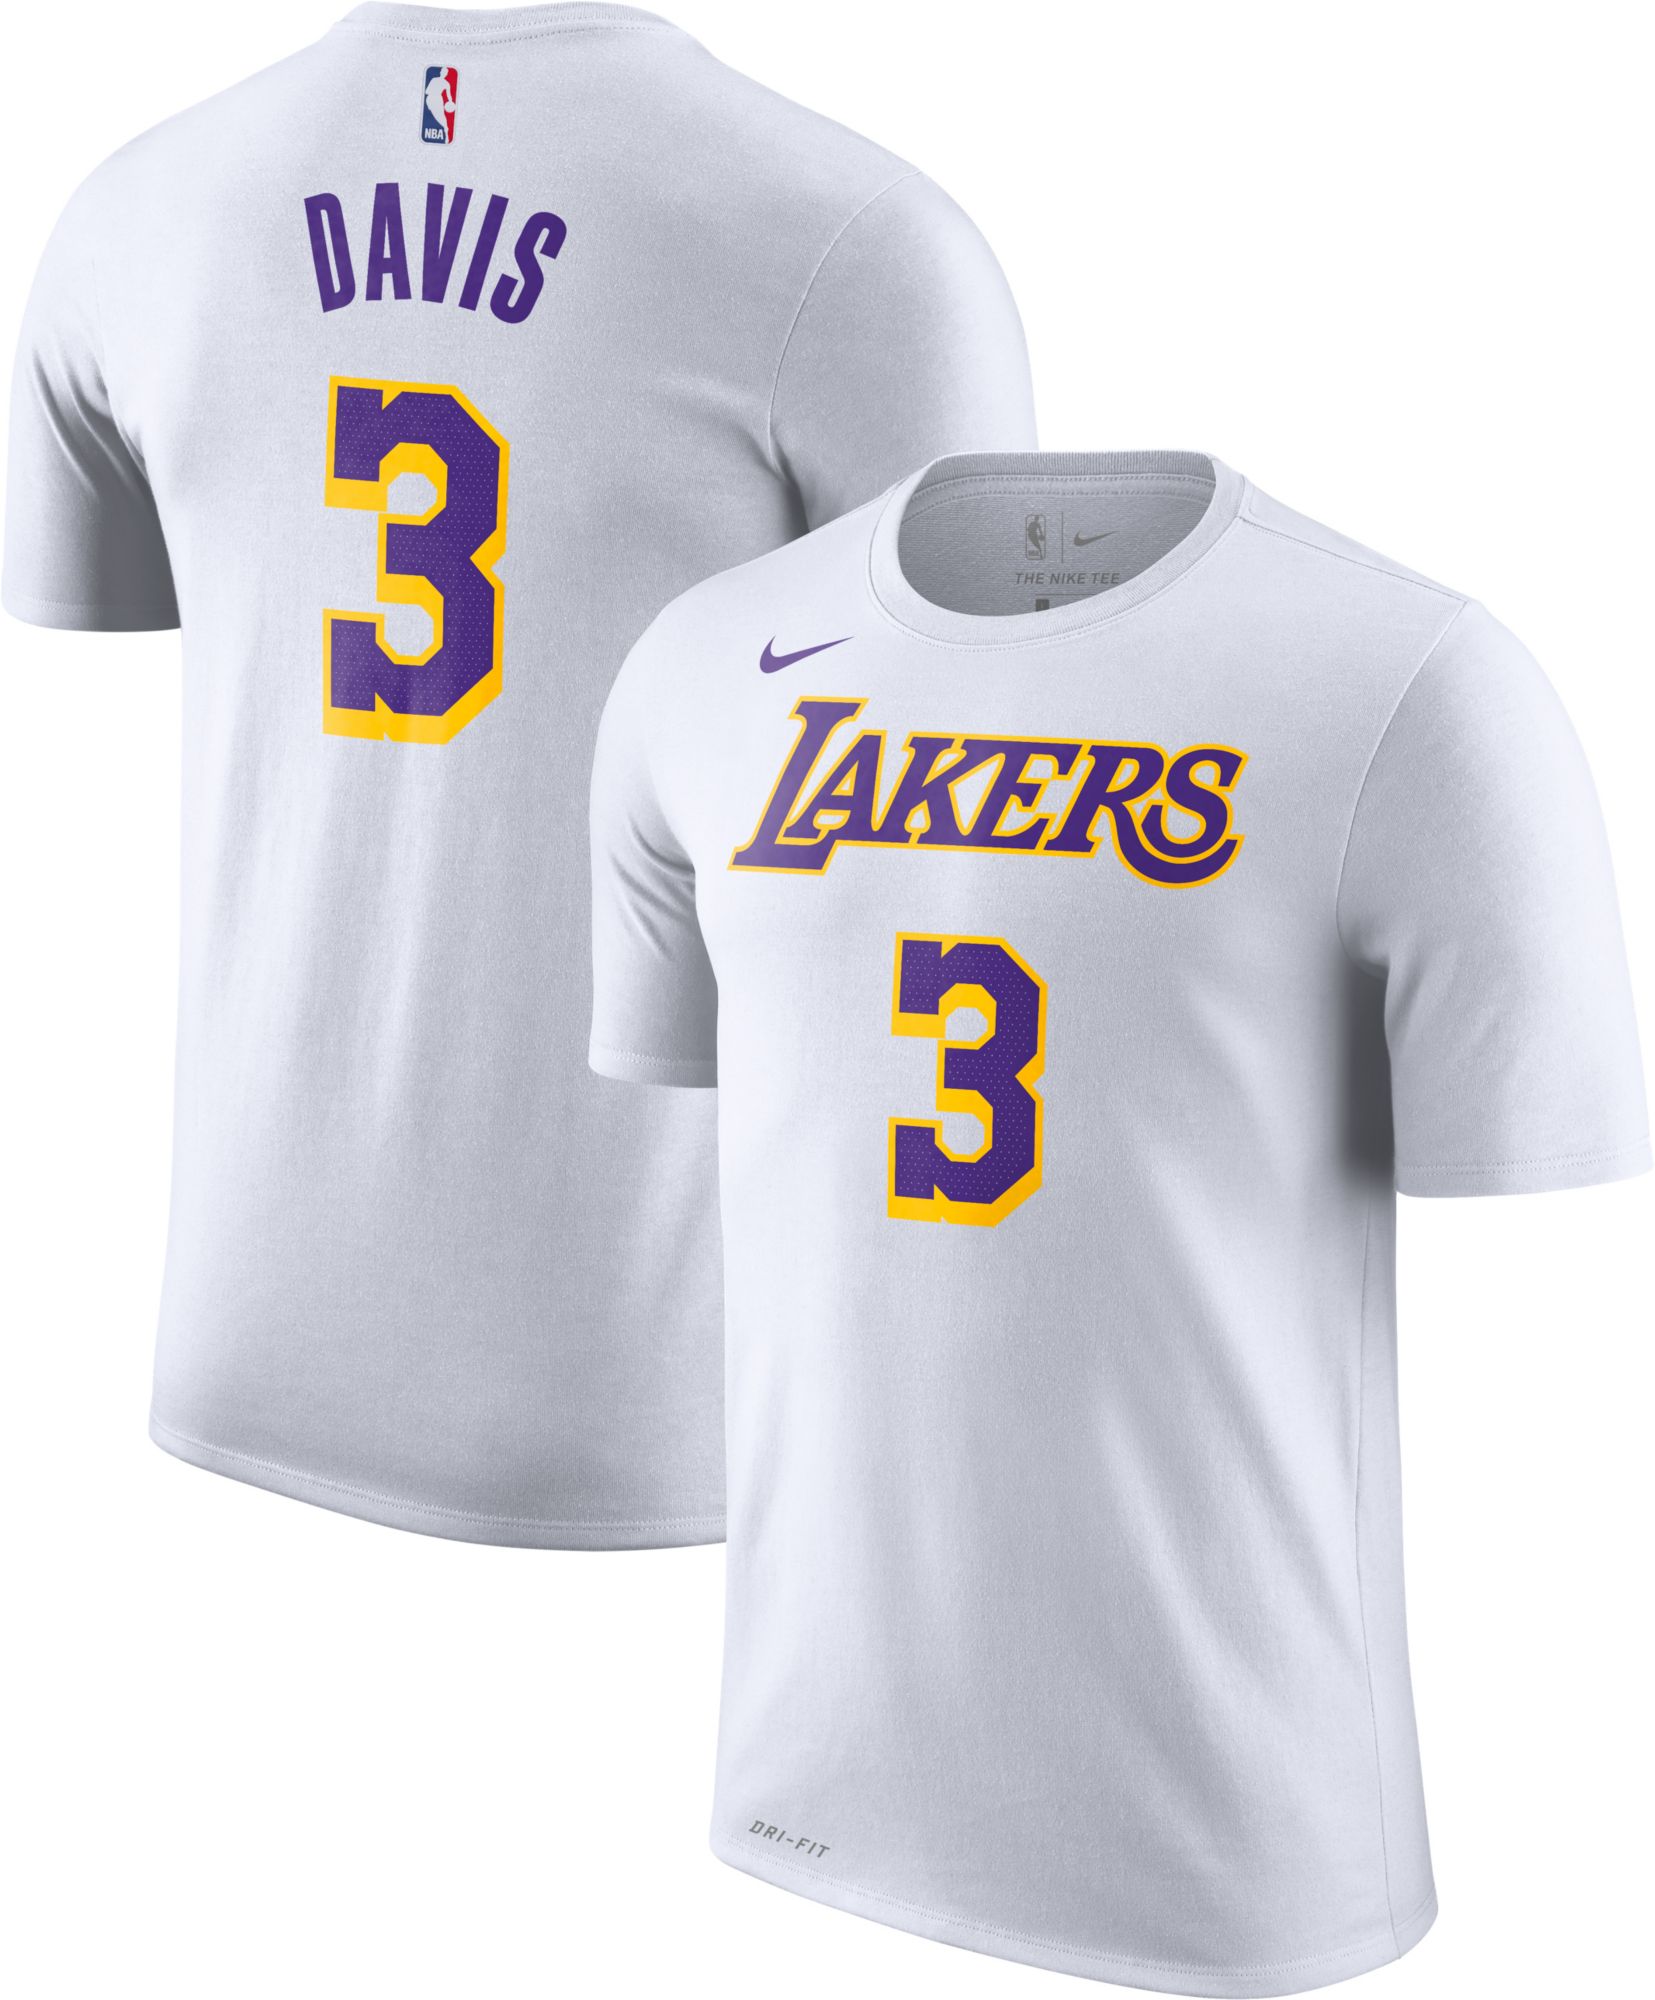 lakers youth jersey cheap